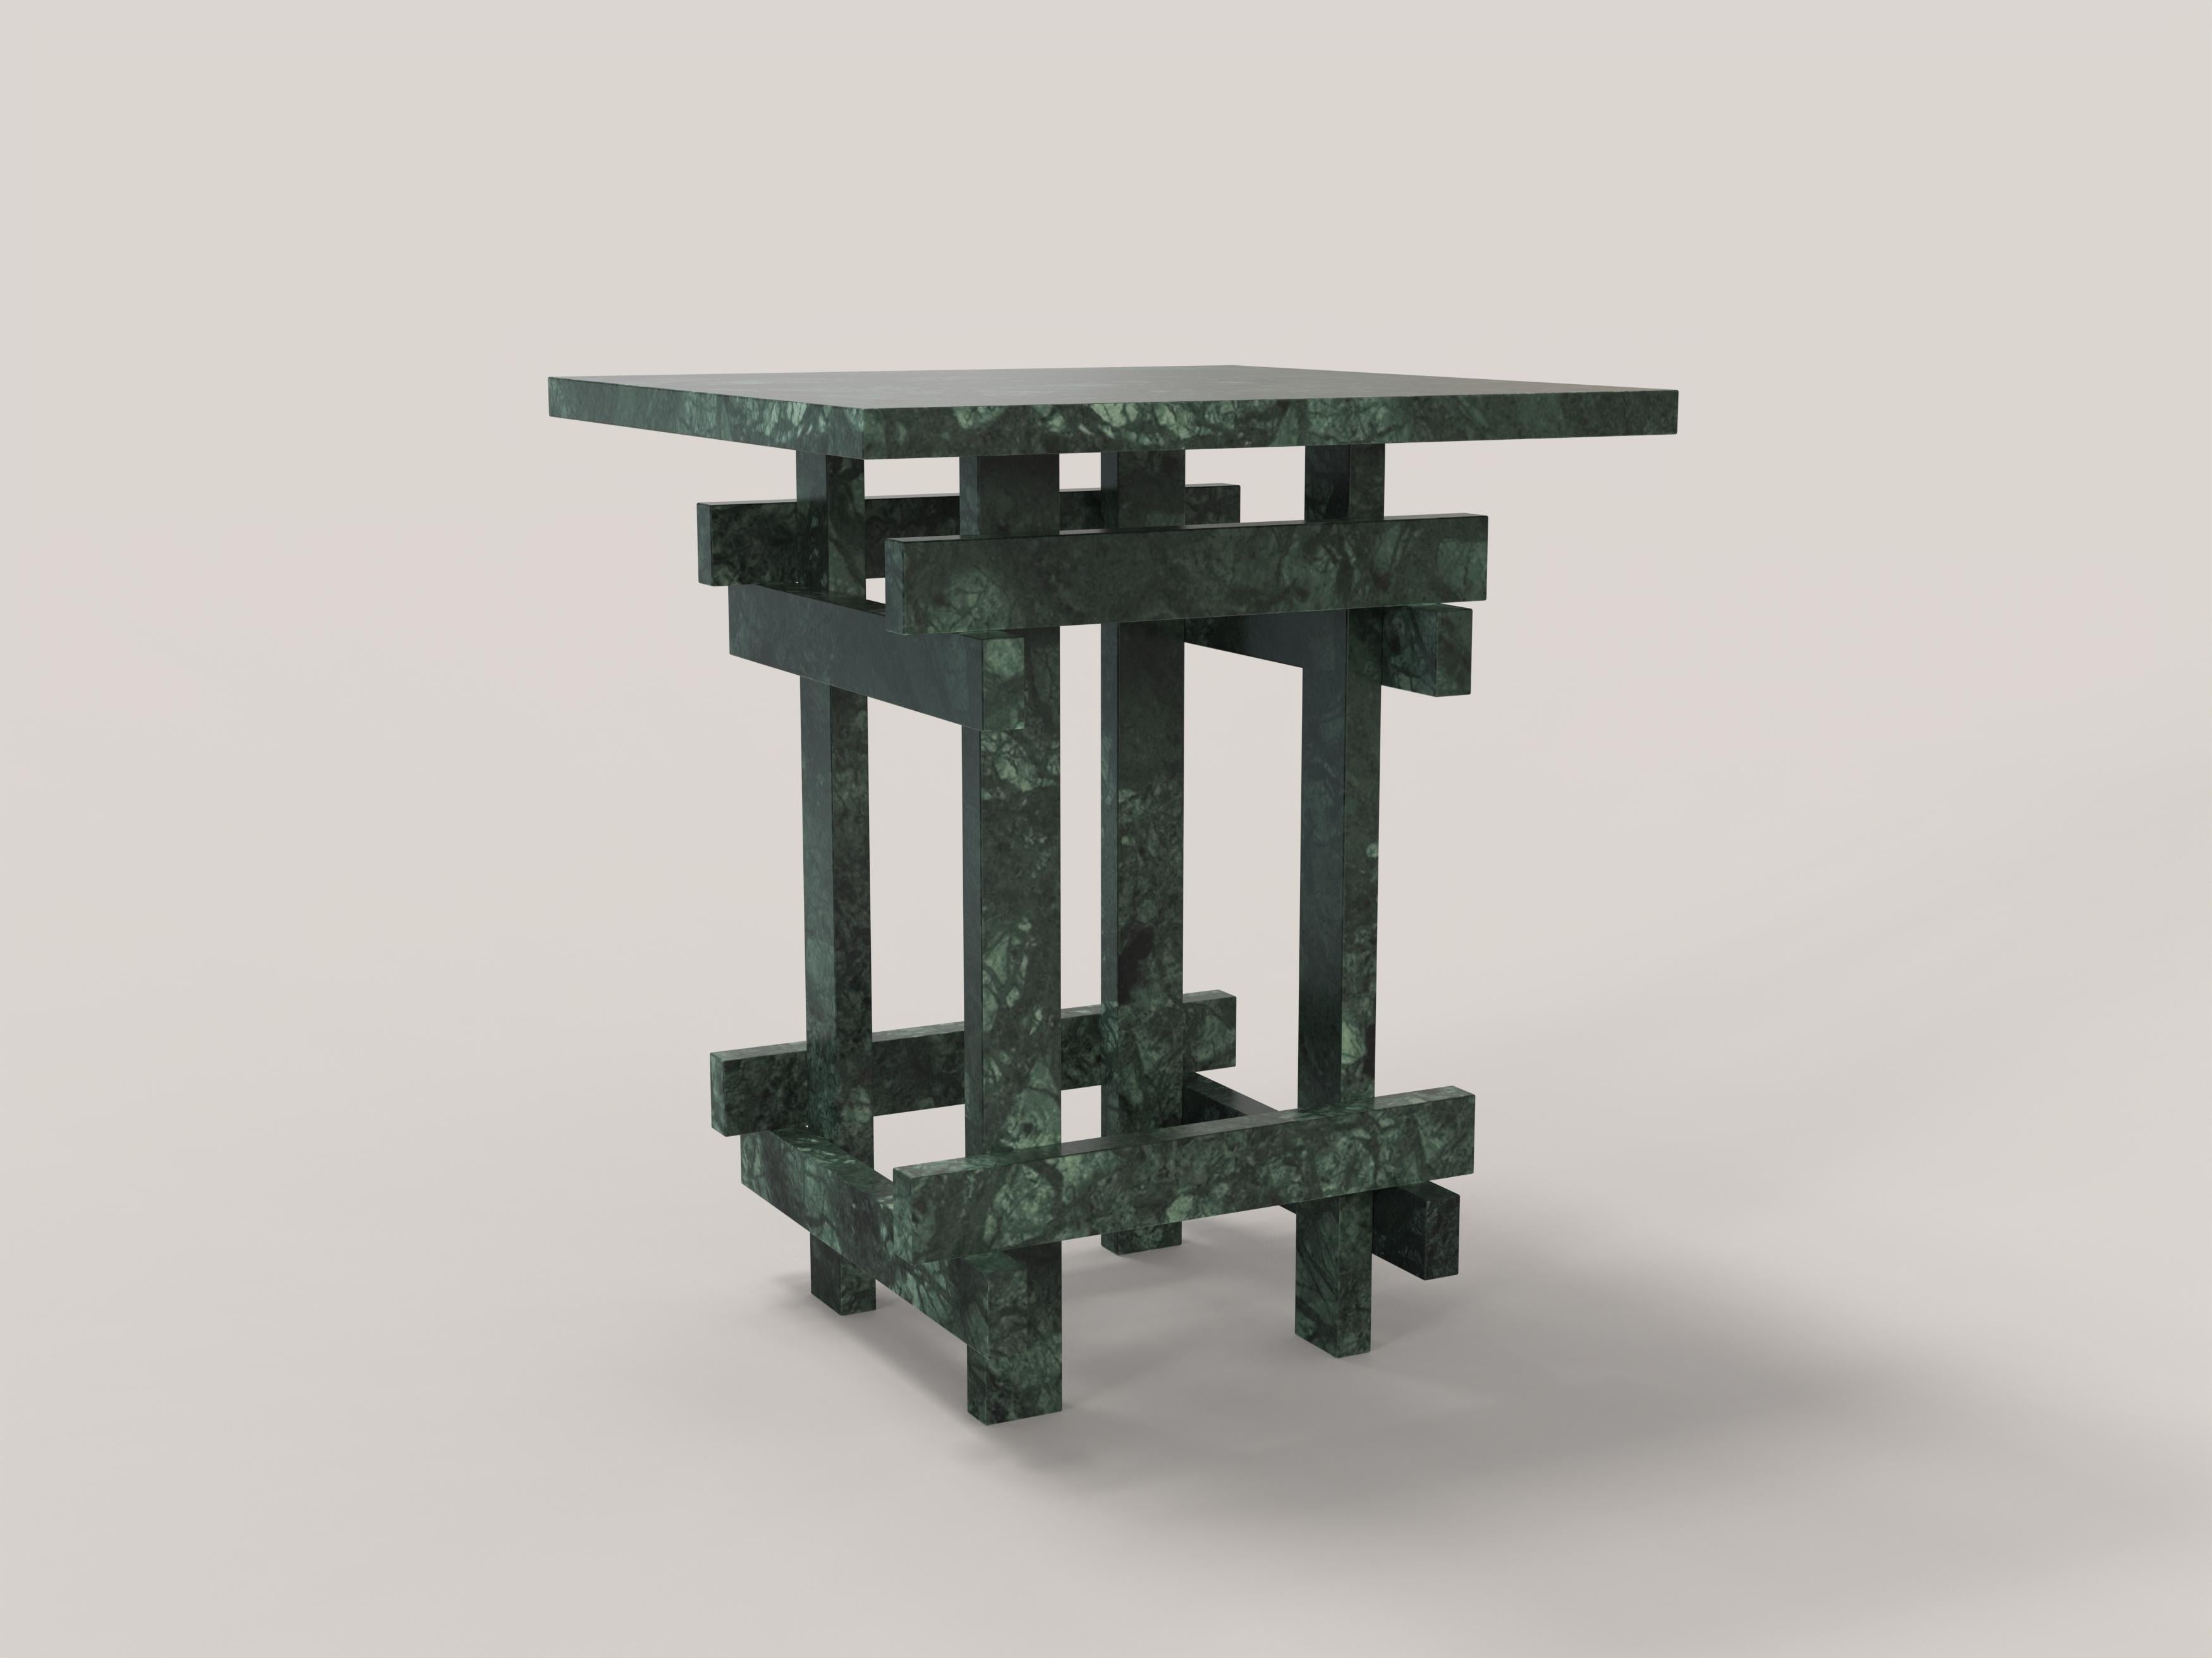 Contemporary LimitedEdition Green Marble Table, Paranoid V1 by Edizione Limitata For Sale 6